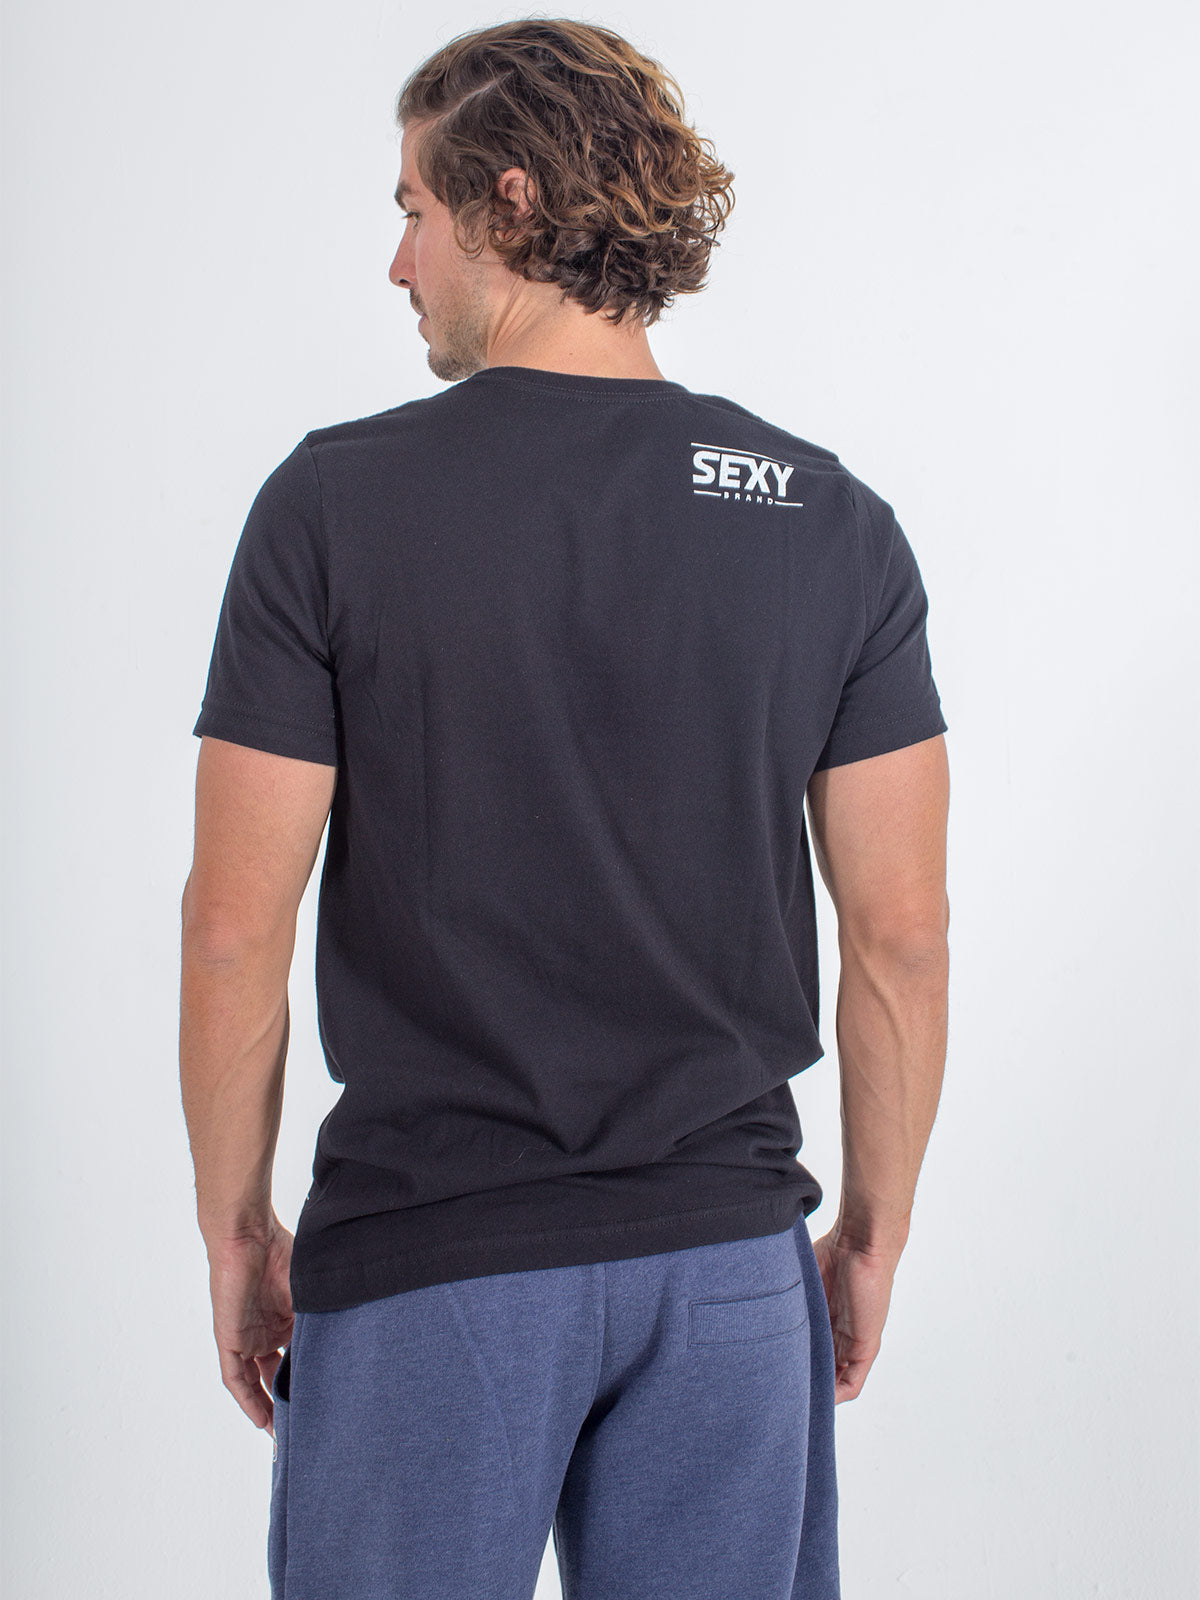 Men's Sexy Brand Sexy Definition Tee T-Shirt Black back view with men's sexy logo